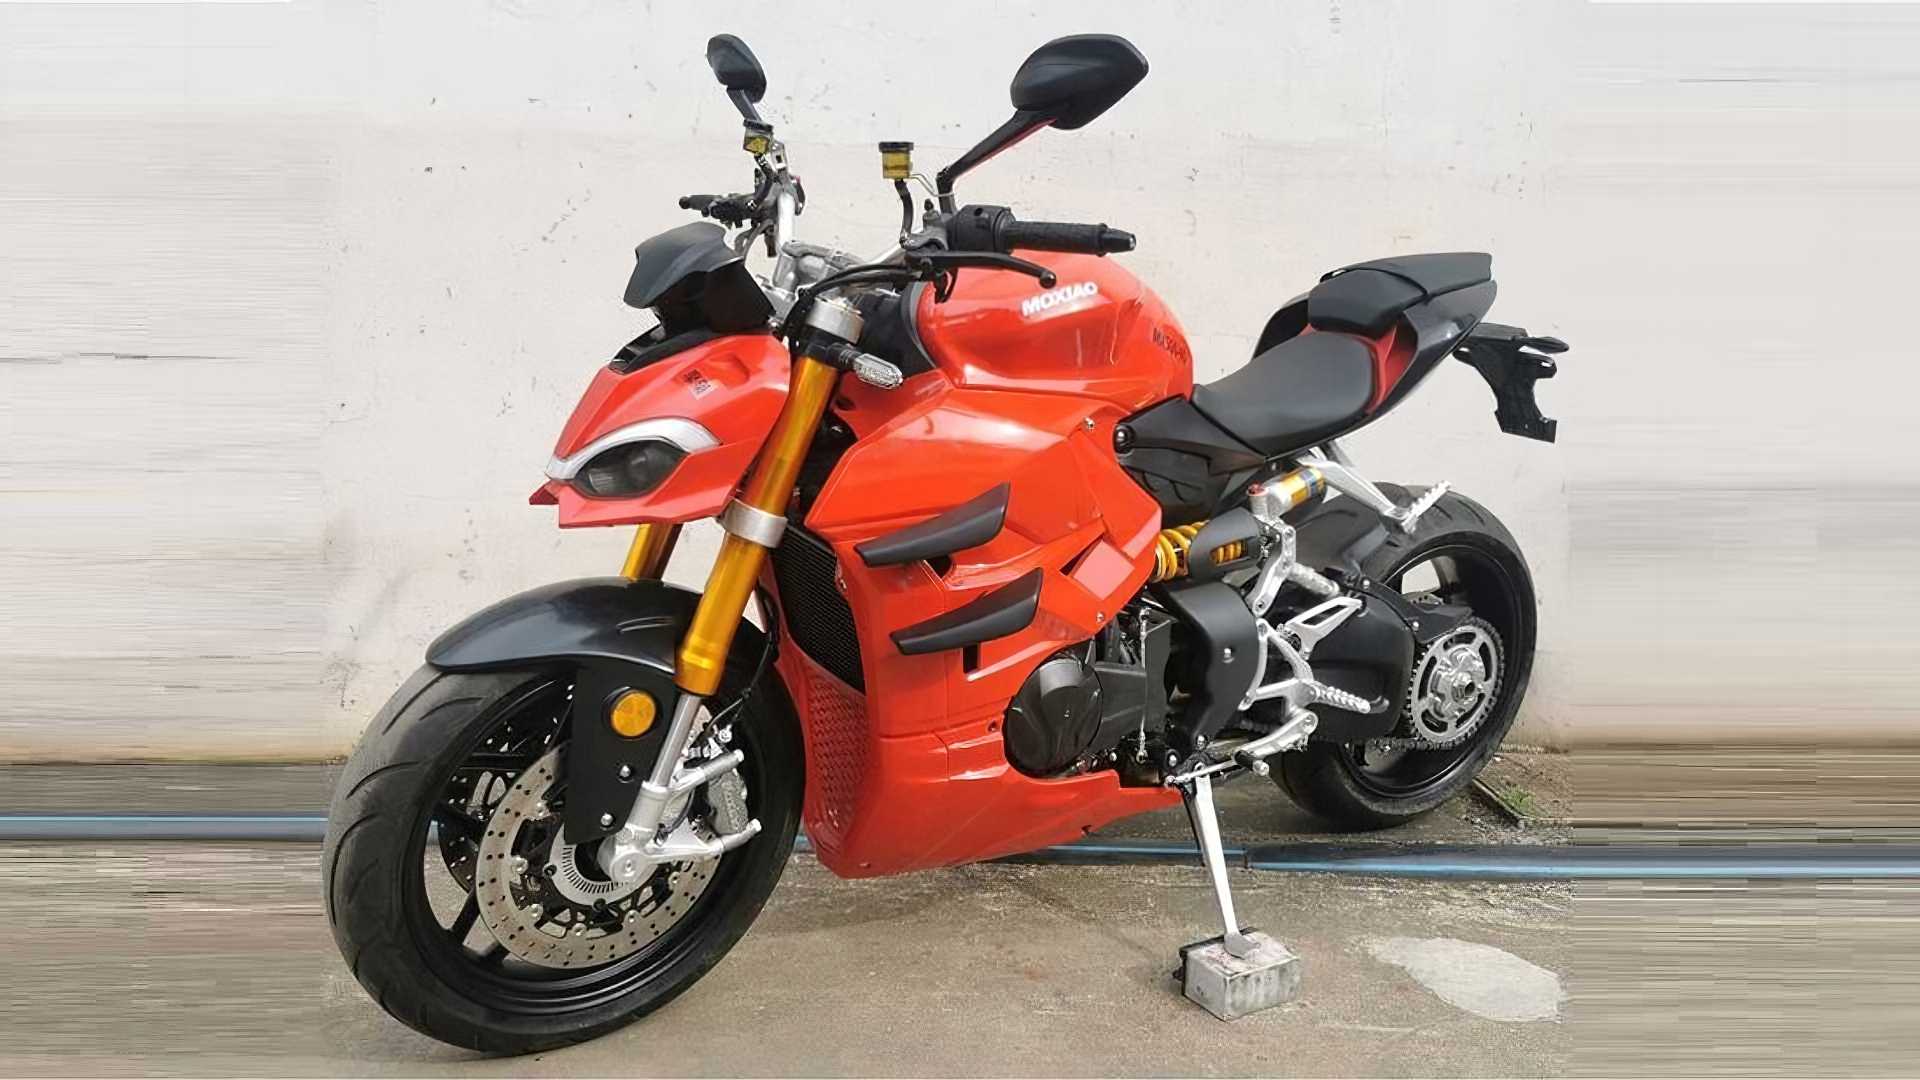 Moxiao copies again - this time the Ducati Streetfighter V4
- also in the MOTORCYCLES.NEWS APP